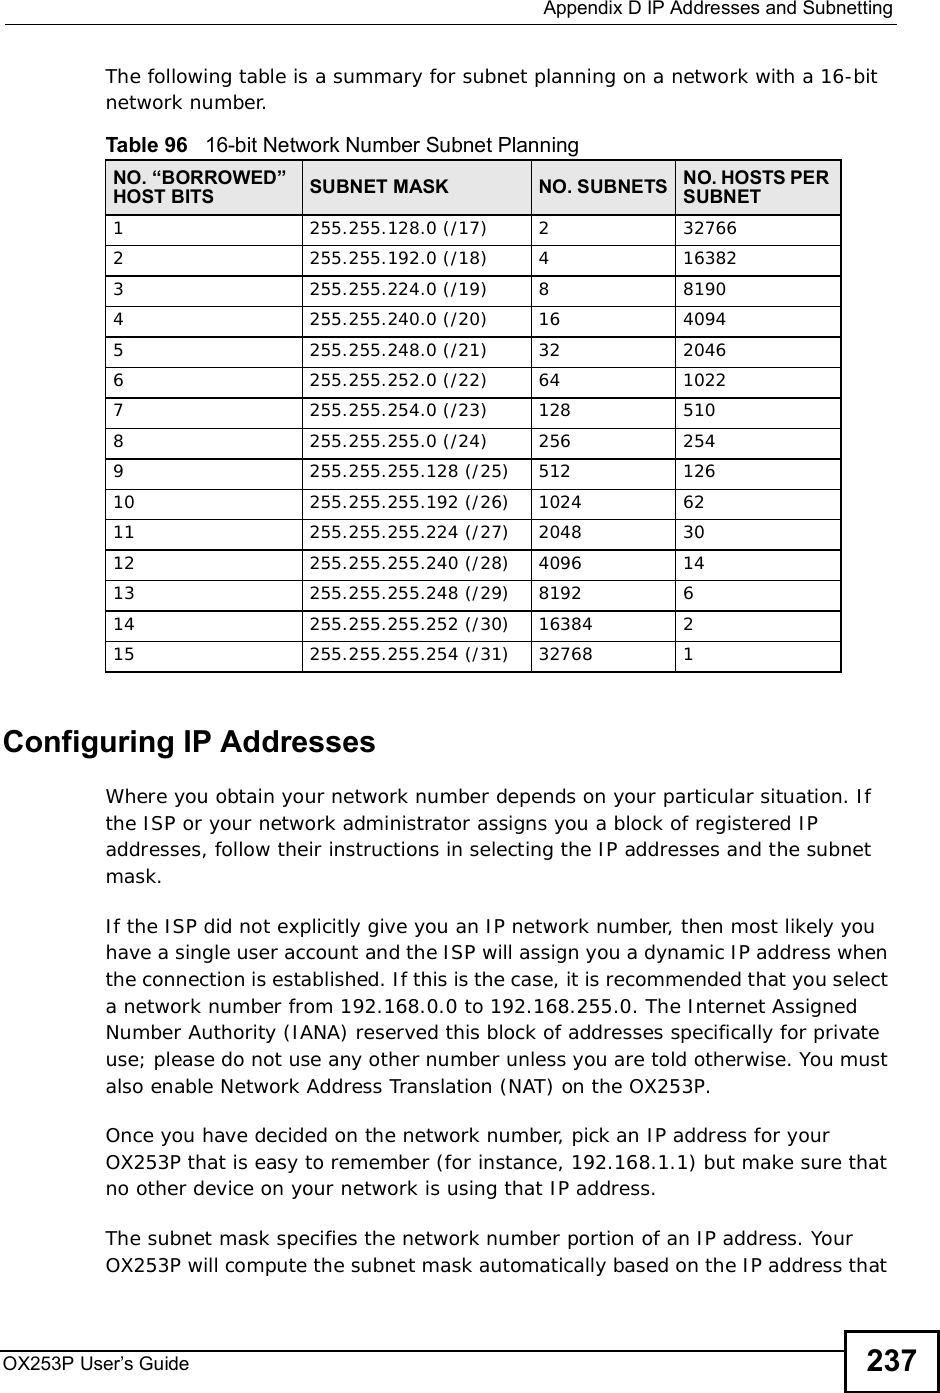  Appendix DIP Addresses and SubnettingOX253P User’s Guide 237The following table is a summary for subnet planning on a network with a 16-bit network number. Configuring IP AddressesWhere you obtain your network number depends on your particular situation. If the ISP or your network administrator assigns you a block of registered IP addresses, follow their instructions in selecting the IP addresses and the subnet mask.If the ISP did not explicitly give you an IP network number, then most likely you have a single user account and the ISP will assign you a dynamic IP address when the connection is established. If this is the case, it is recommended that you select a network number from 192.168.0.0 to 192.168.255.0. The Internet Assigned Number Authority (IANA) reserved this block of addresses specifically for private use; please do not use any other number unless you are told otherwise. You must also enable Network Address Translation (NAT) on the OX253P. Once you have decided on the network number, pick an IP address for your OX253P that is easy to remember (for instance, 192.168.1.1) but make sure that no other device on your network is using that IP address.The subnet mask specifies the network number portion of an IP address. Your OX253P will compute the subnet mask automatically based on the IP address that Table 96   16-bit Network Number Subnet PlanningNO. “BORROWED” HOST BITS SUBNET MASK NO. SUBNETS NO. HOSTS PER SUBNET1255.255.128.0 (/17) 2 327662 255.255.192.0 (/18) 4 163823 255.255.224.0 (/19) 8 81904255.255.240.0 (/20) 16 40945255.255.248.0 (/21) 32 20466255.255.252.0 (/22) 64 10227255.255.254.0 (/23) 128 5108 255.255.255.0 (/24) 256 2549 255.255.255.128 (/25) 512 12610 255.255.255.192 (/26) 1024 6211 255.255.255.224 (/27) 2048 3012 255.255.255.240 (/28) 4096 1413 255.255.255.248 (/29) 8192 614 255.255.255.252 (/30) 16384 215 255.255.255.254 (/31) 32768 1